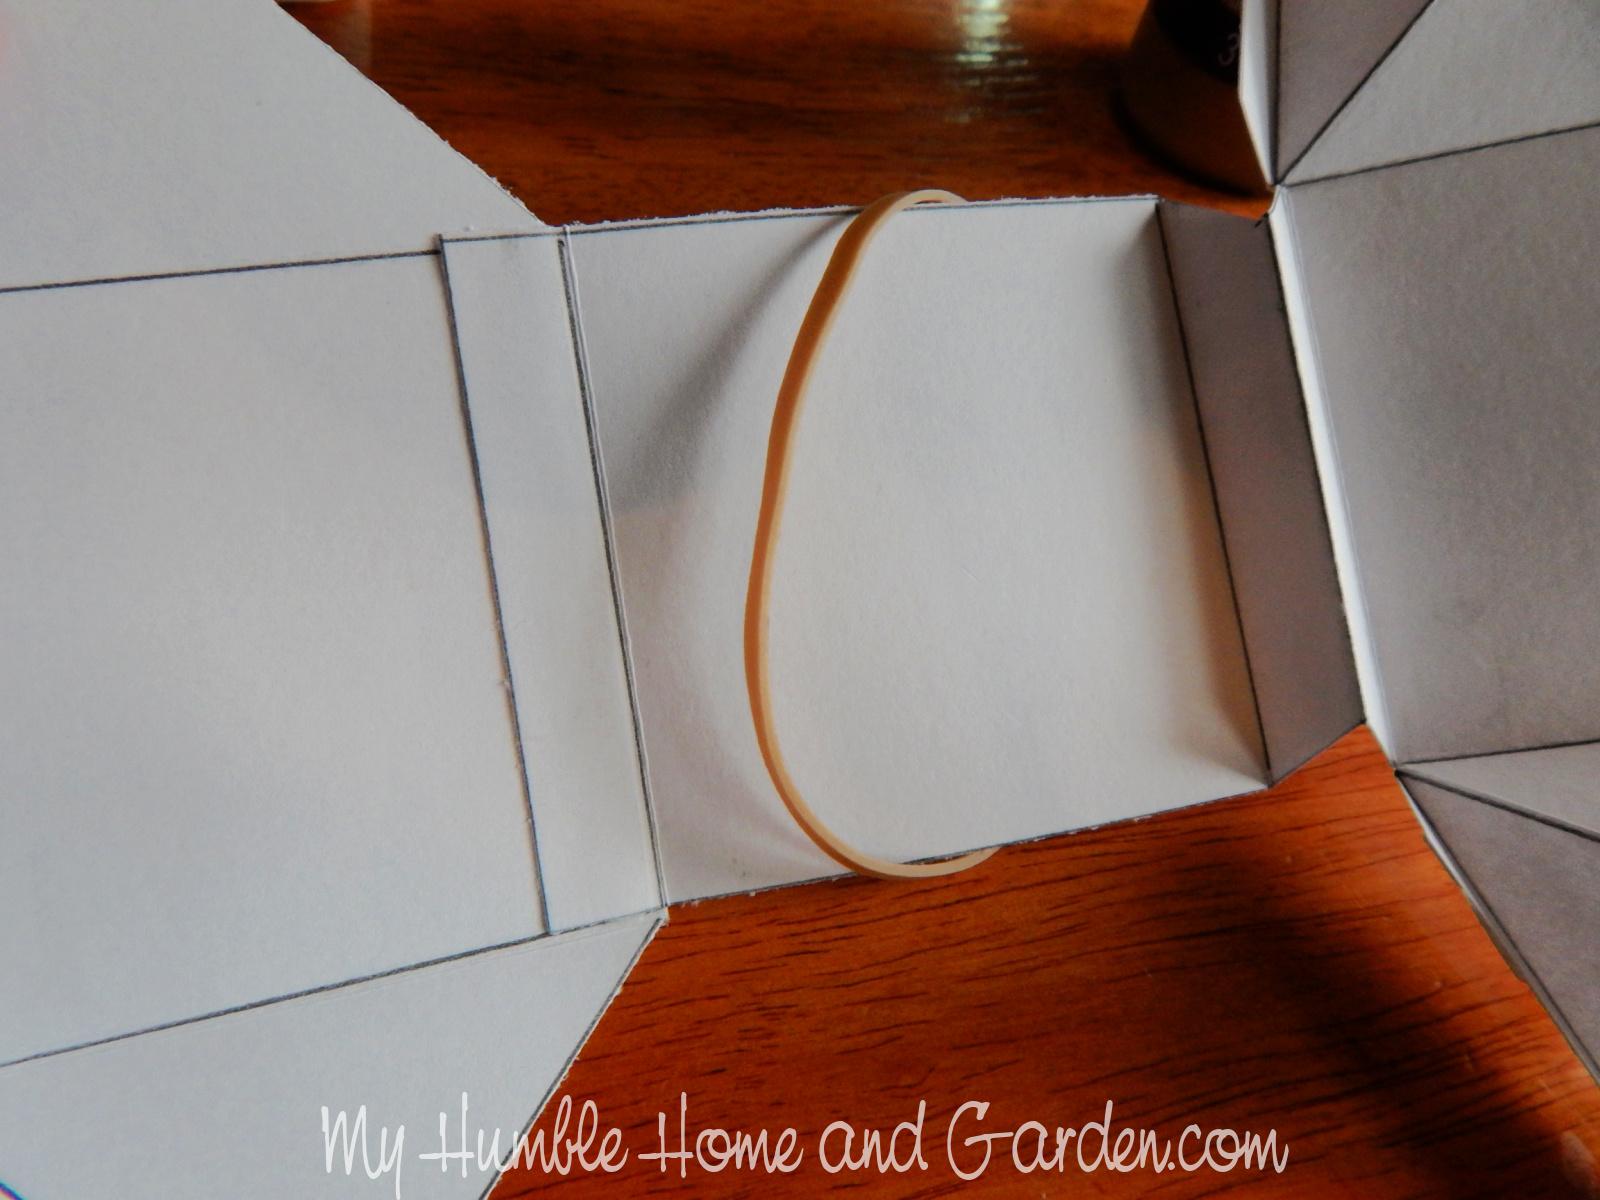 How to Make a DIY Boomf with Gift Box - My Humble Home and Garden